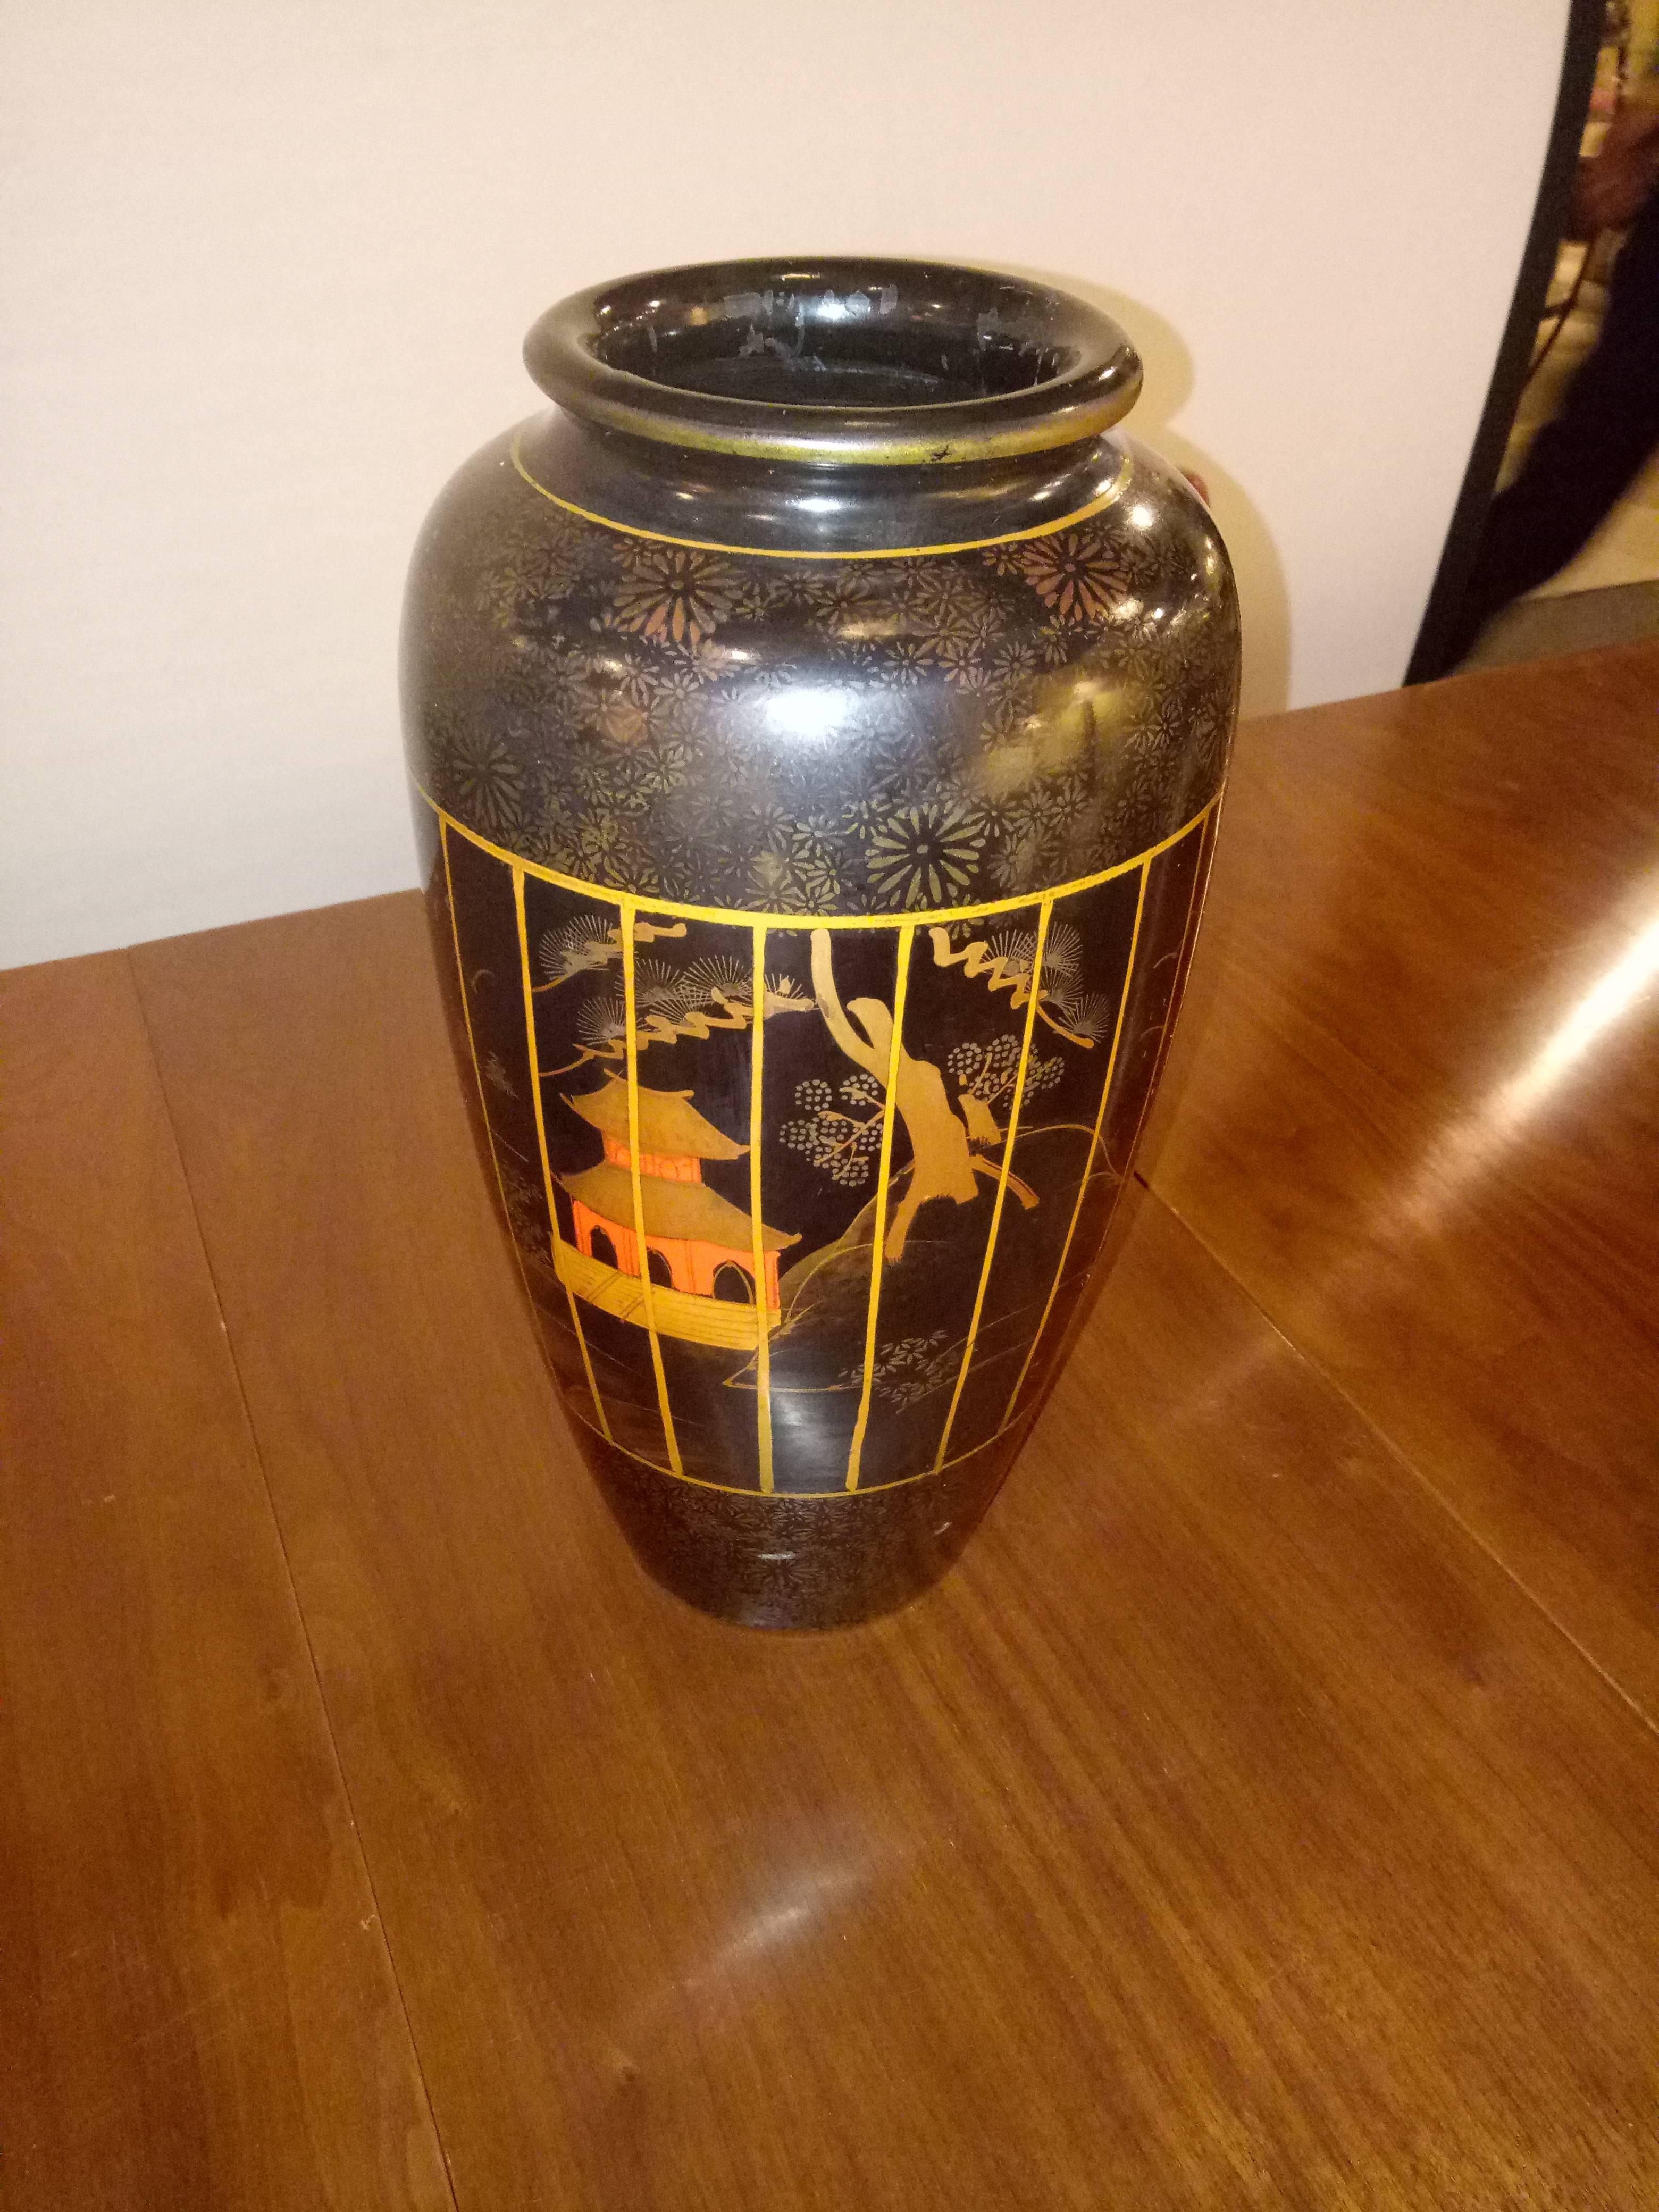 Pair of Japanese hand-painted Vases. Ebonized in style with painted scenes.